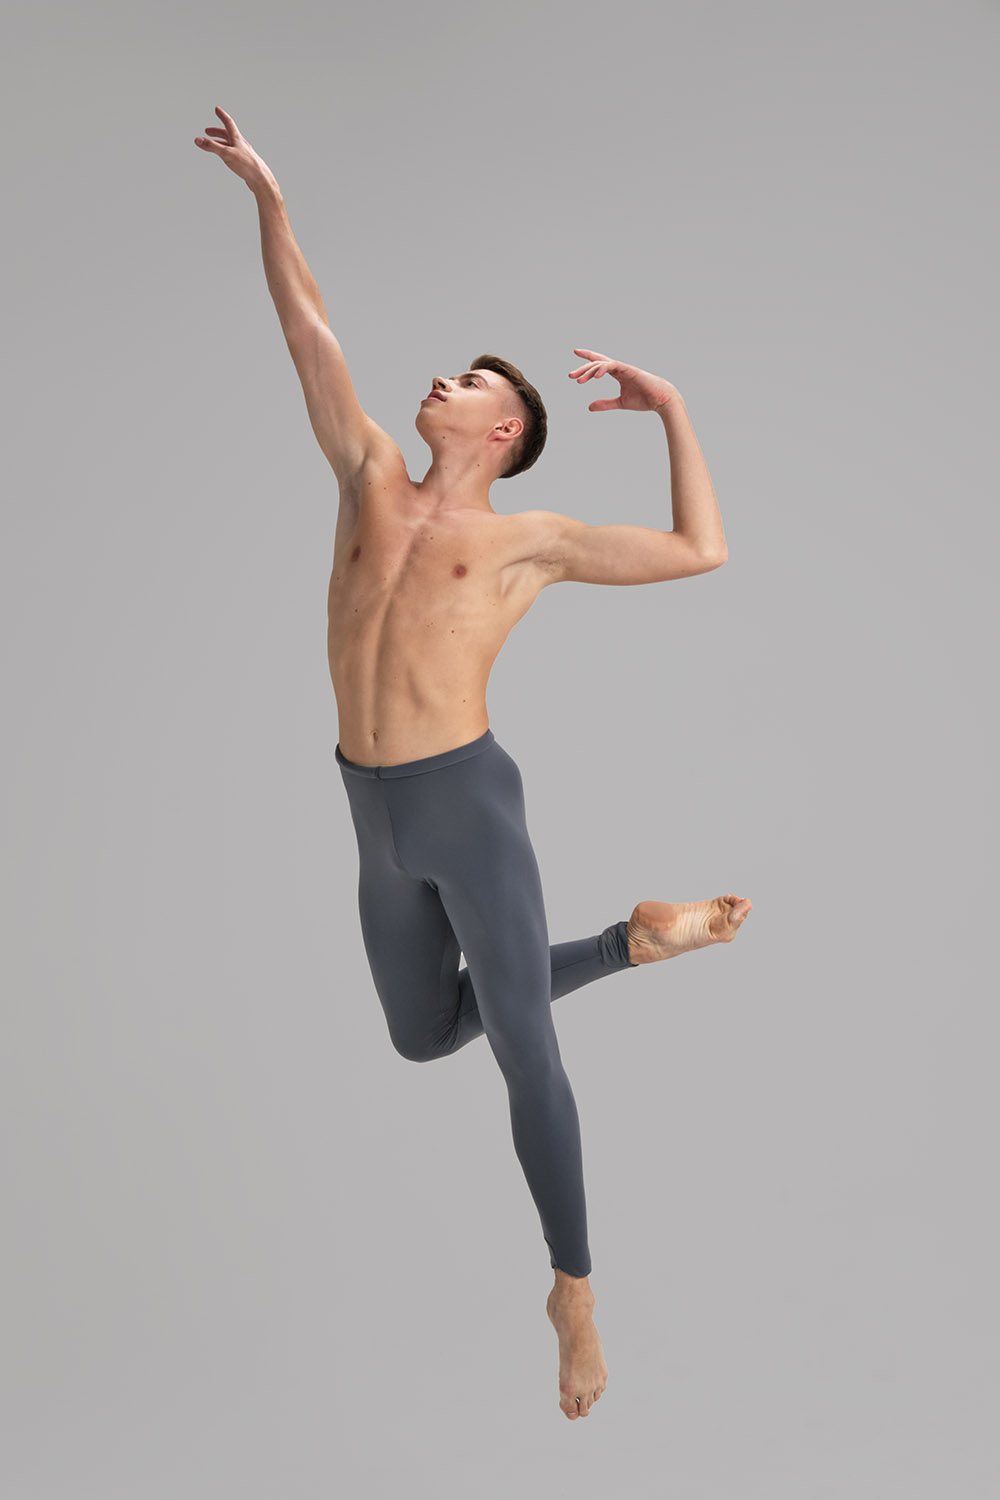 Men's ballet tights don't leave much to the imagination : r/funny